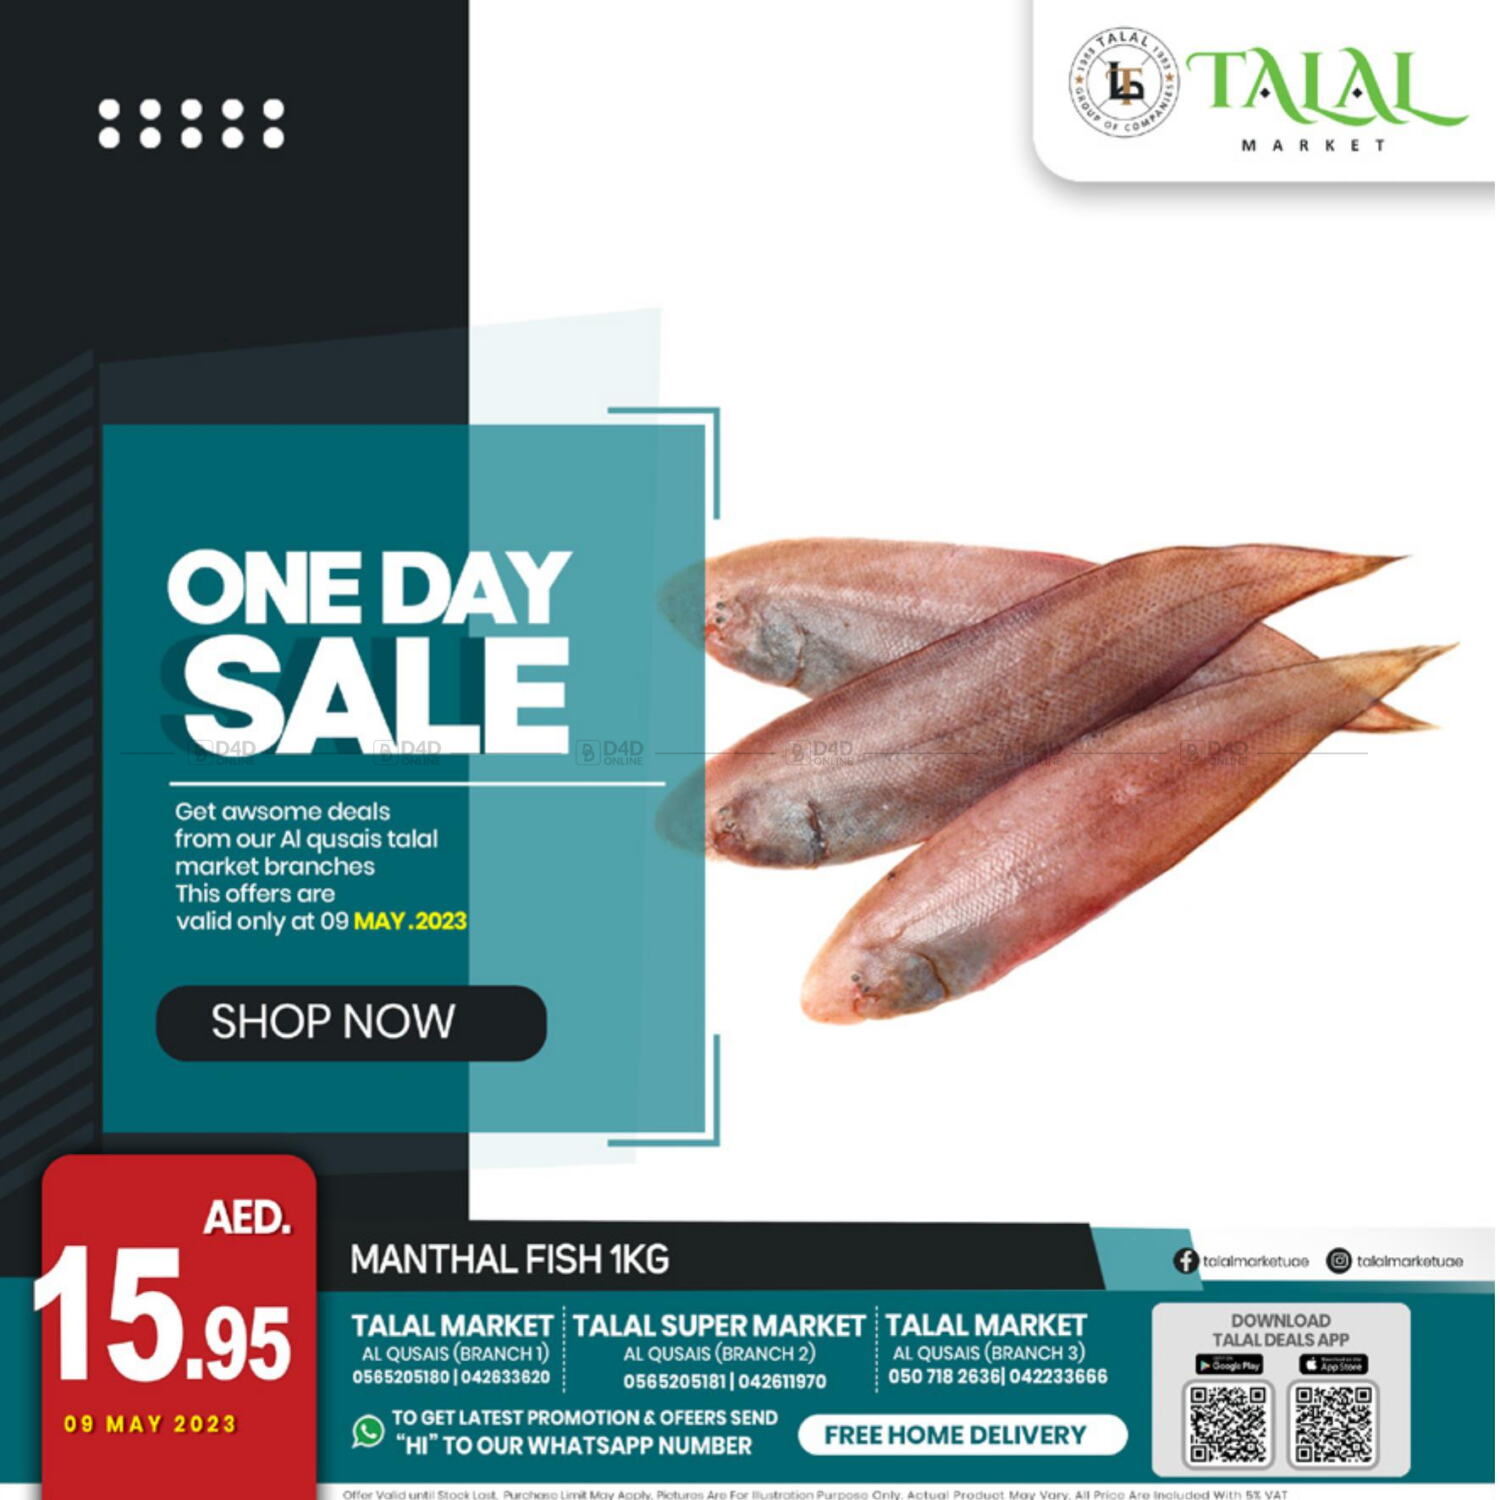 TALAL MARKET ONE DAY SALE TILL 09 MAY 2023